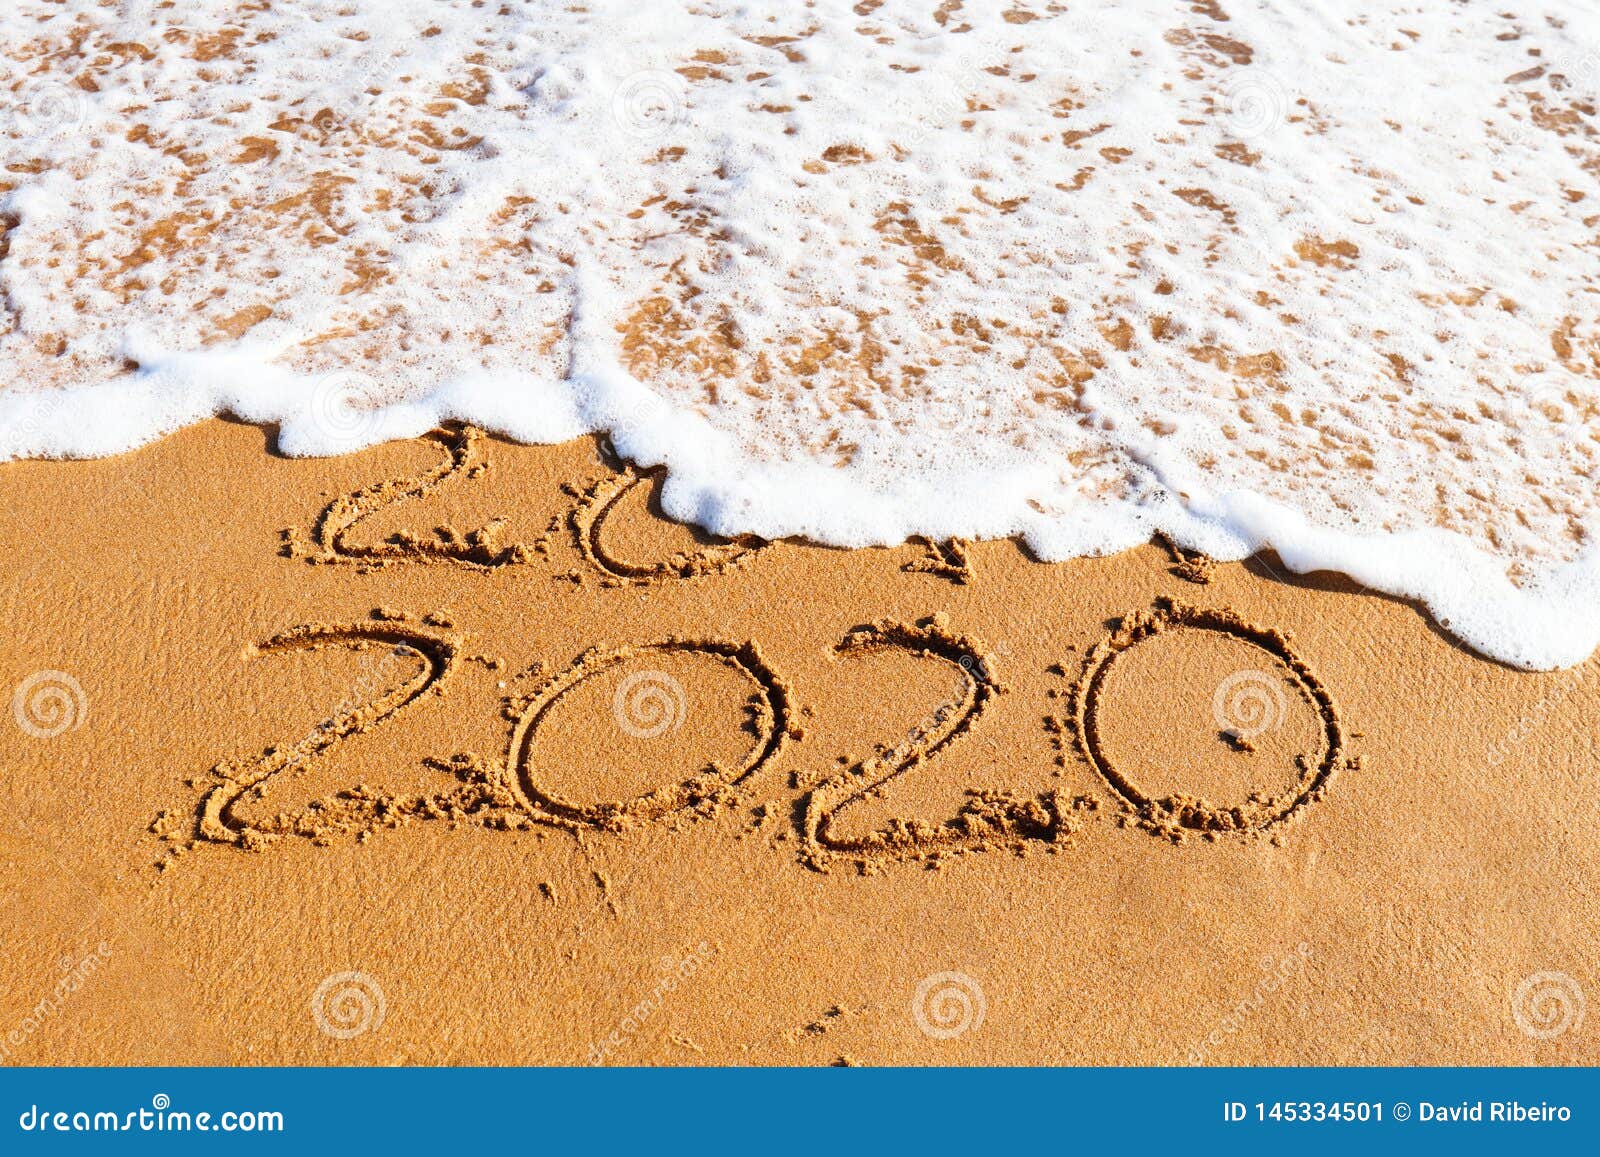 Year Drawn On The Sand Being Washed Away By A Wave Stock Image Image Of December